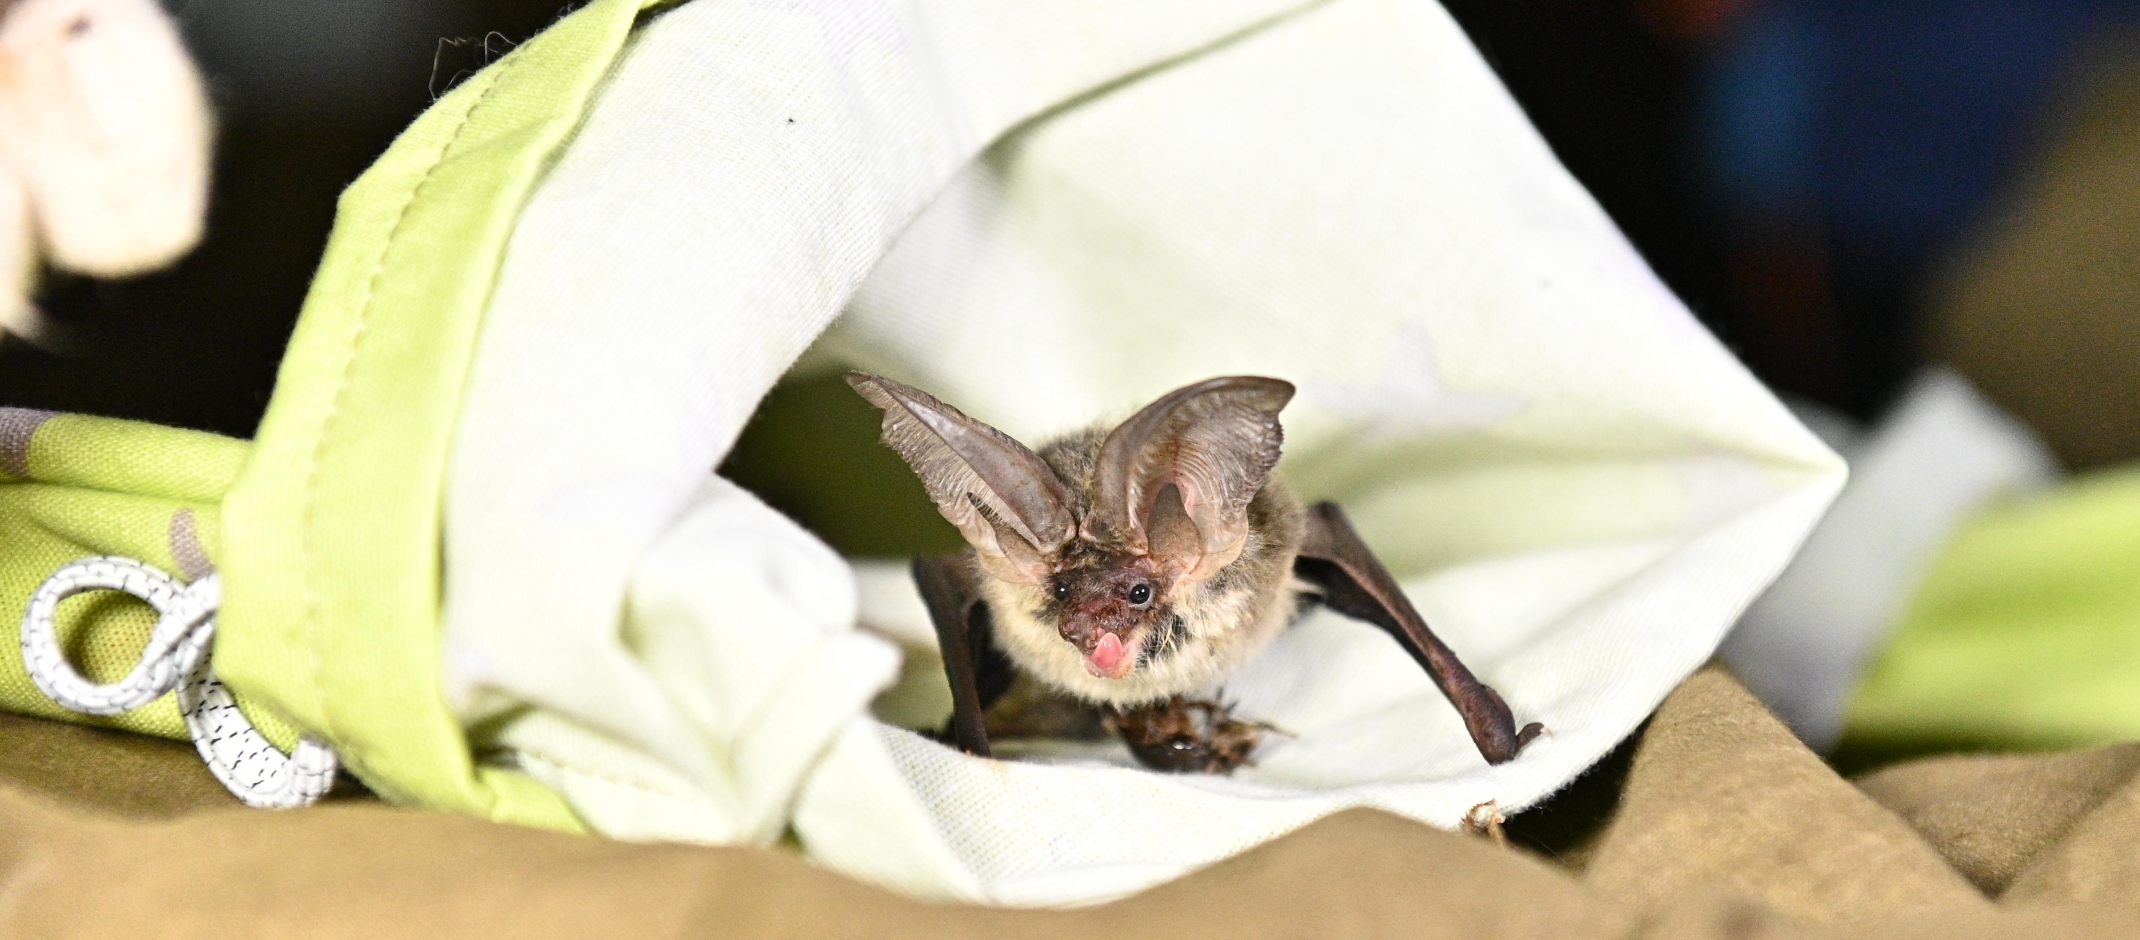 When rescuing bats becomes a way of life 